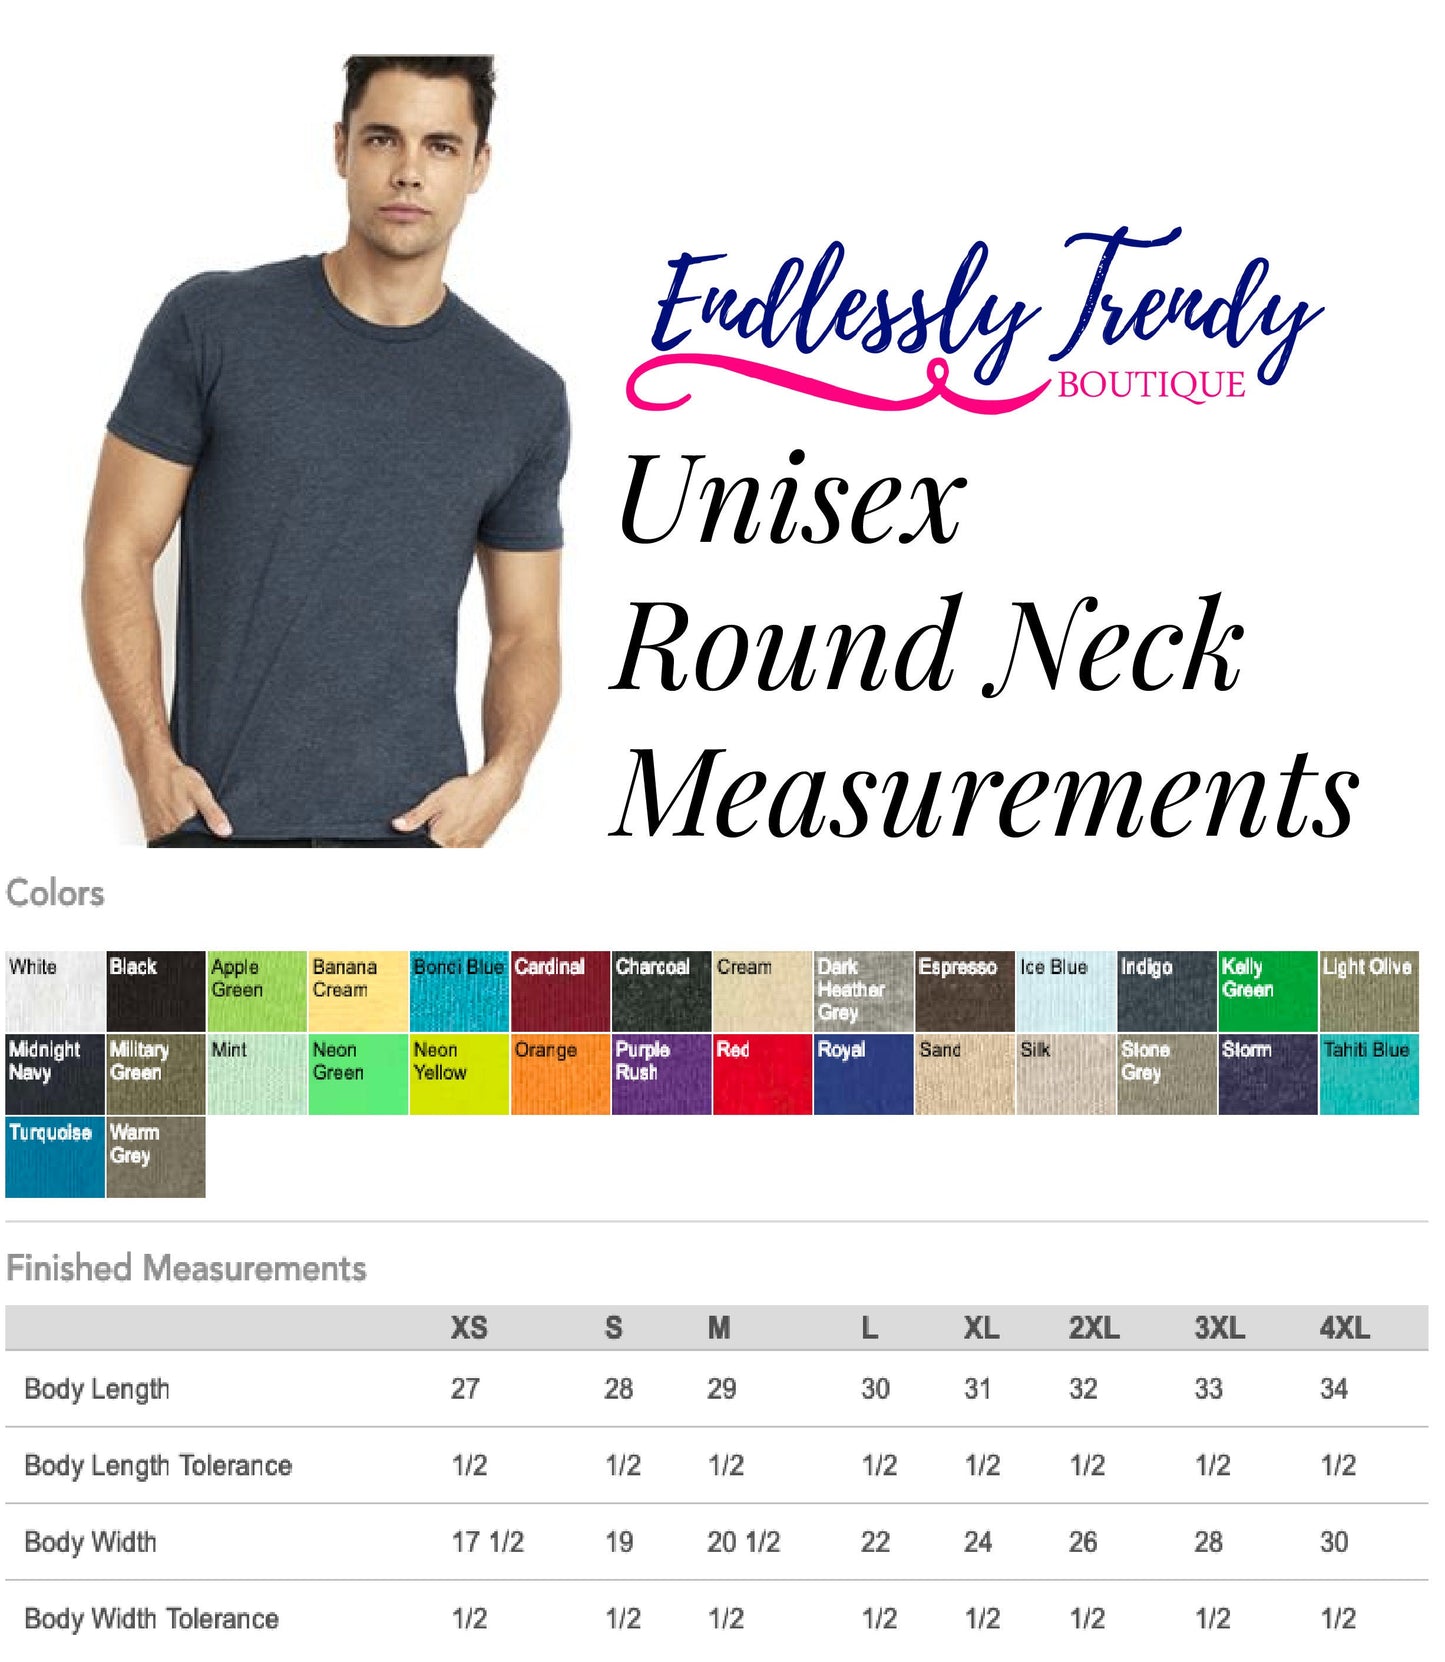 Feel. Step. Walk. Christian T-Shirt* - Endlessly Trendy Boutique